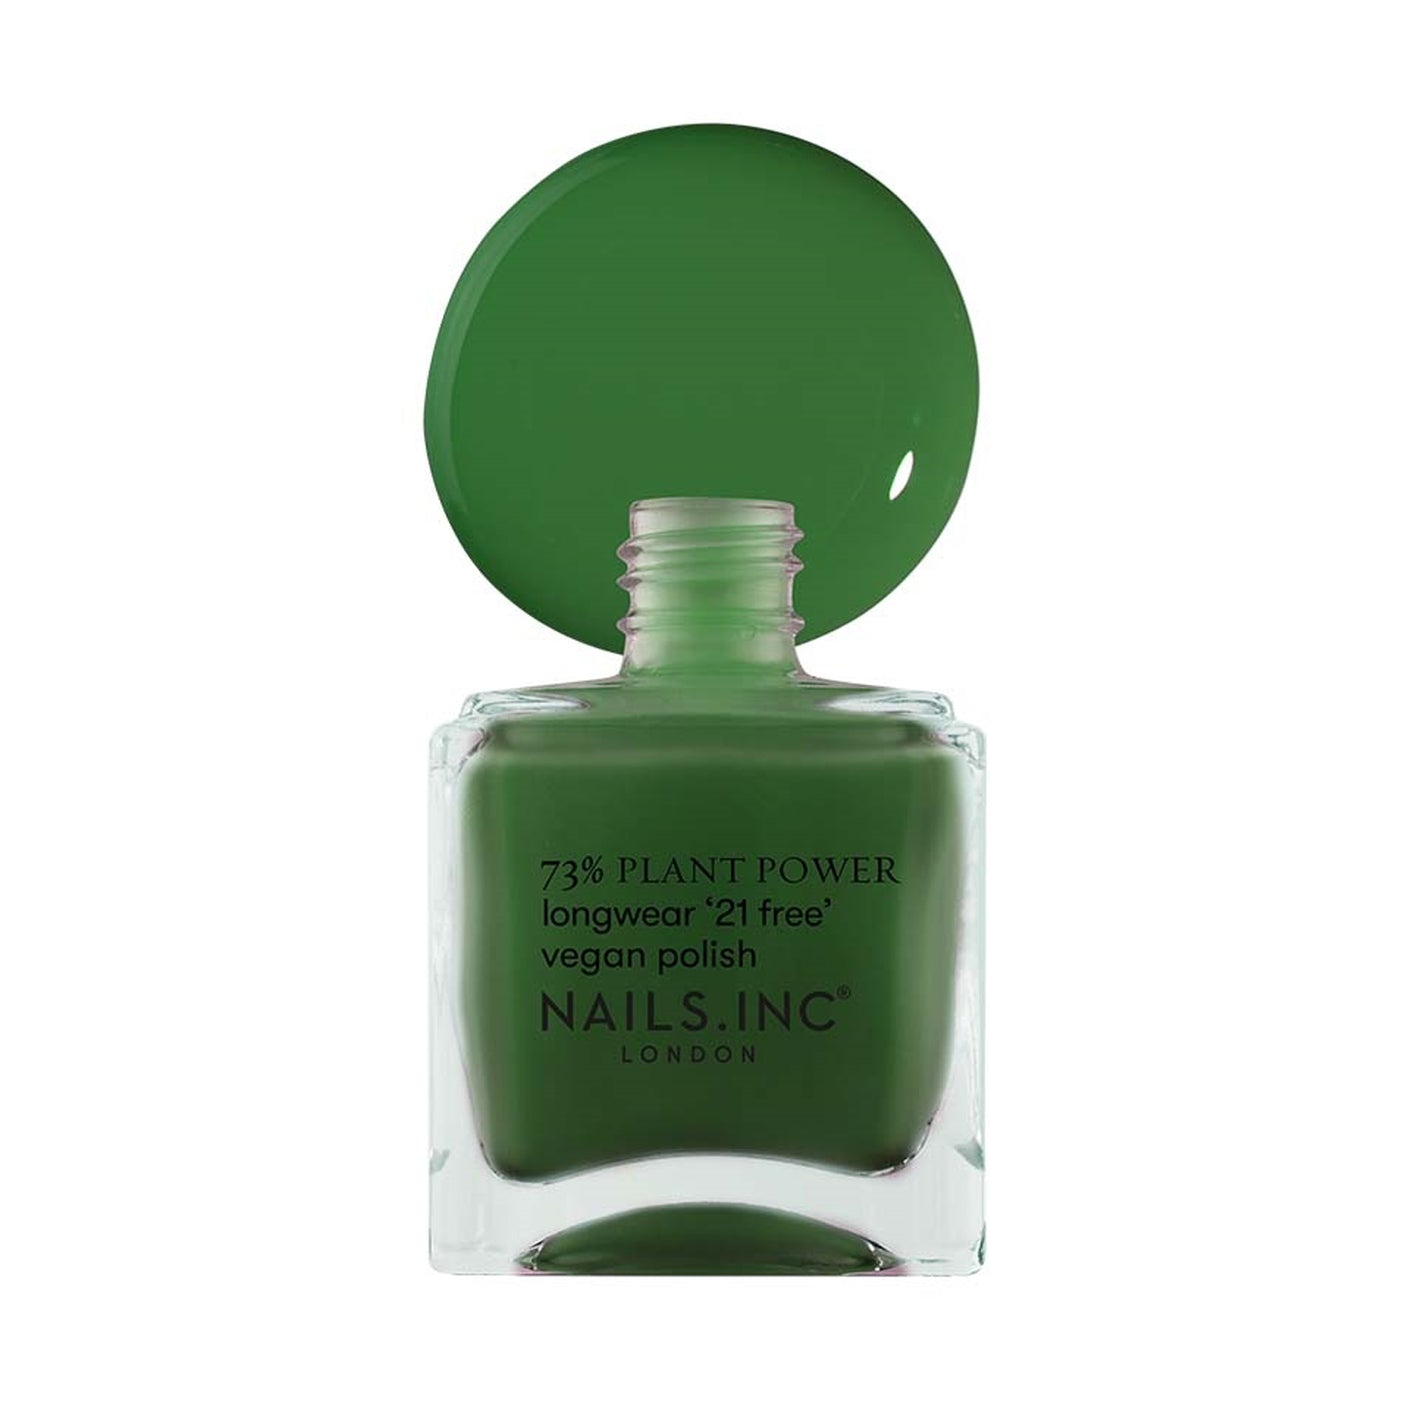 Nails.INC Plant Power - Wipe the Slate Green